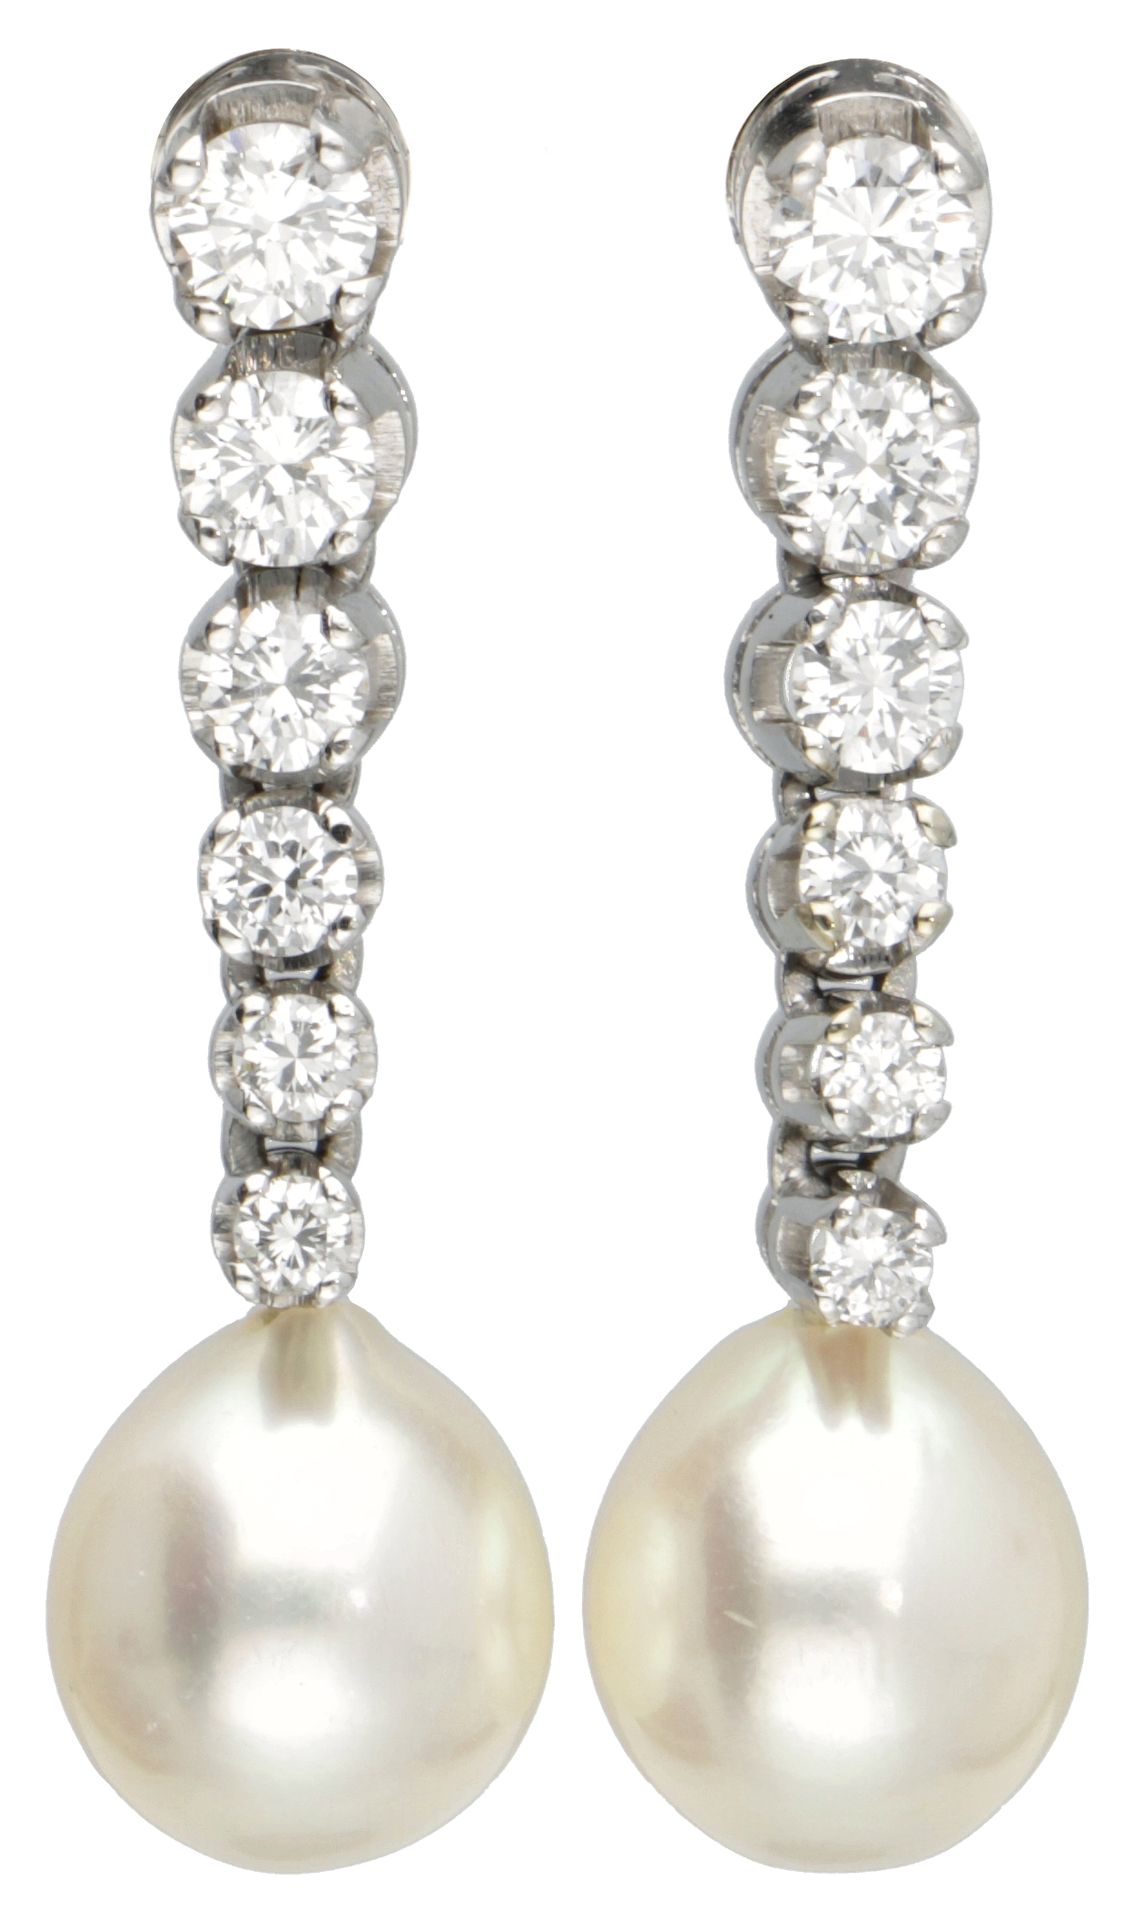 18K. White gold earrings set with approx. 0.85 ct. Diamond and pearl. Hallmarks:&hellip;